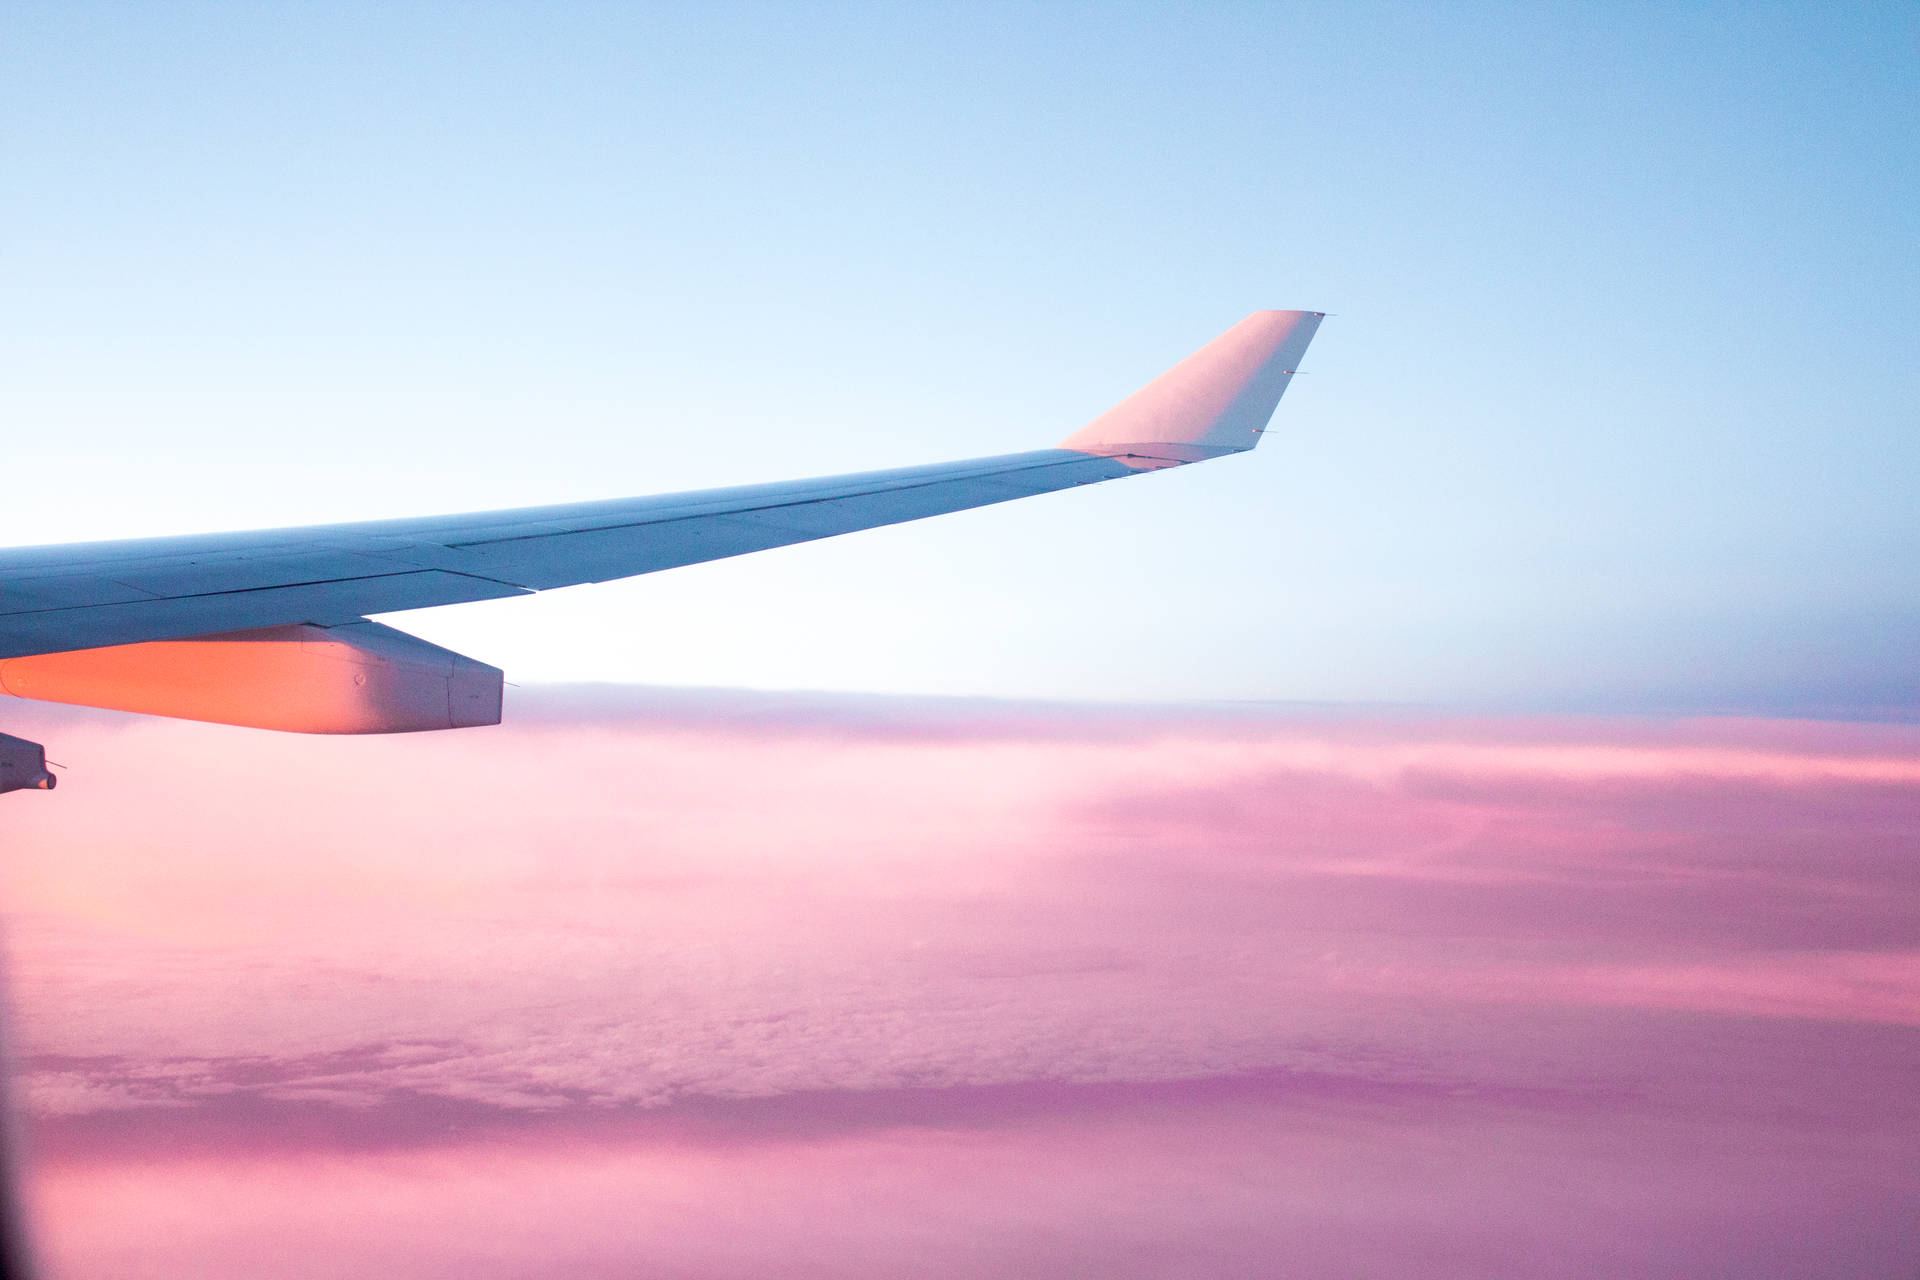 Plane Wing In Pink Sky